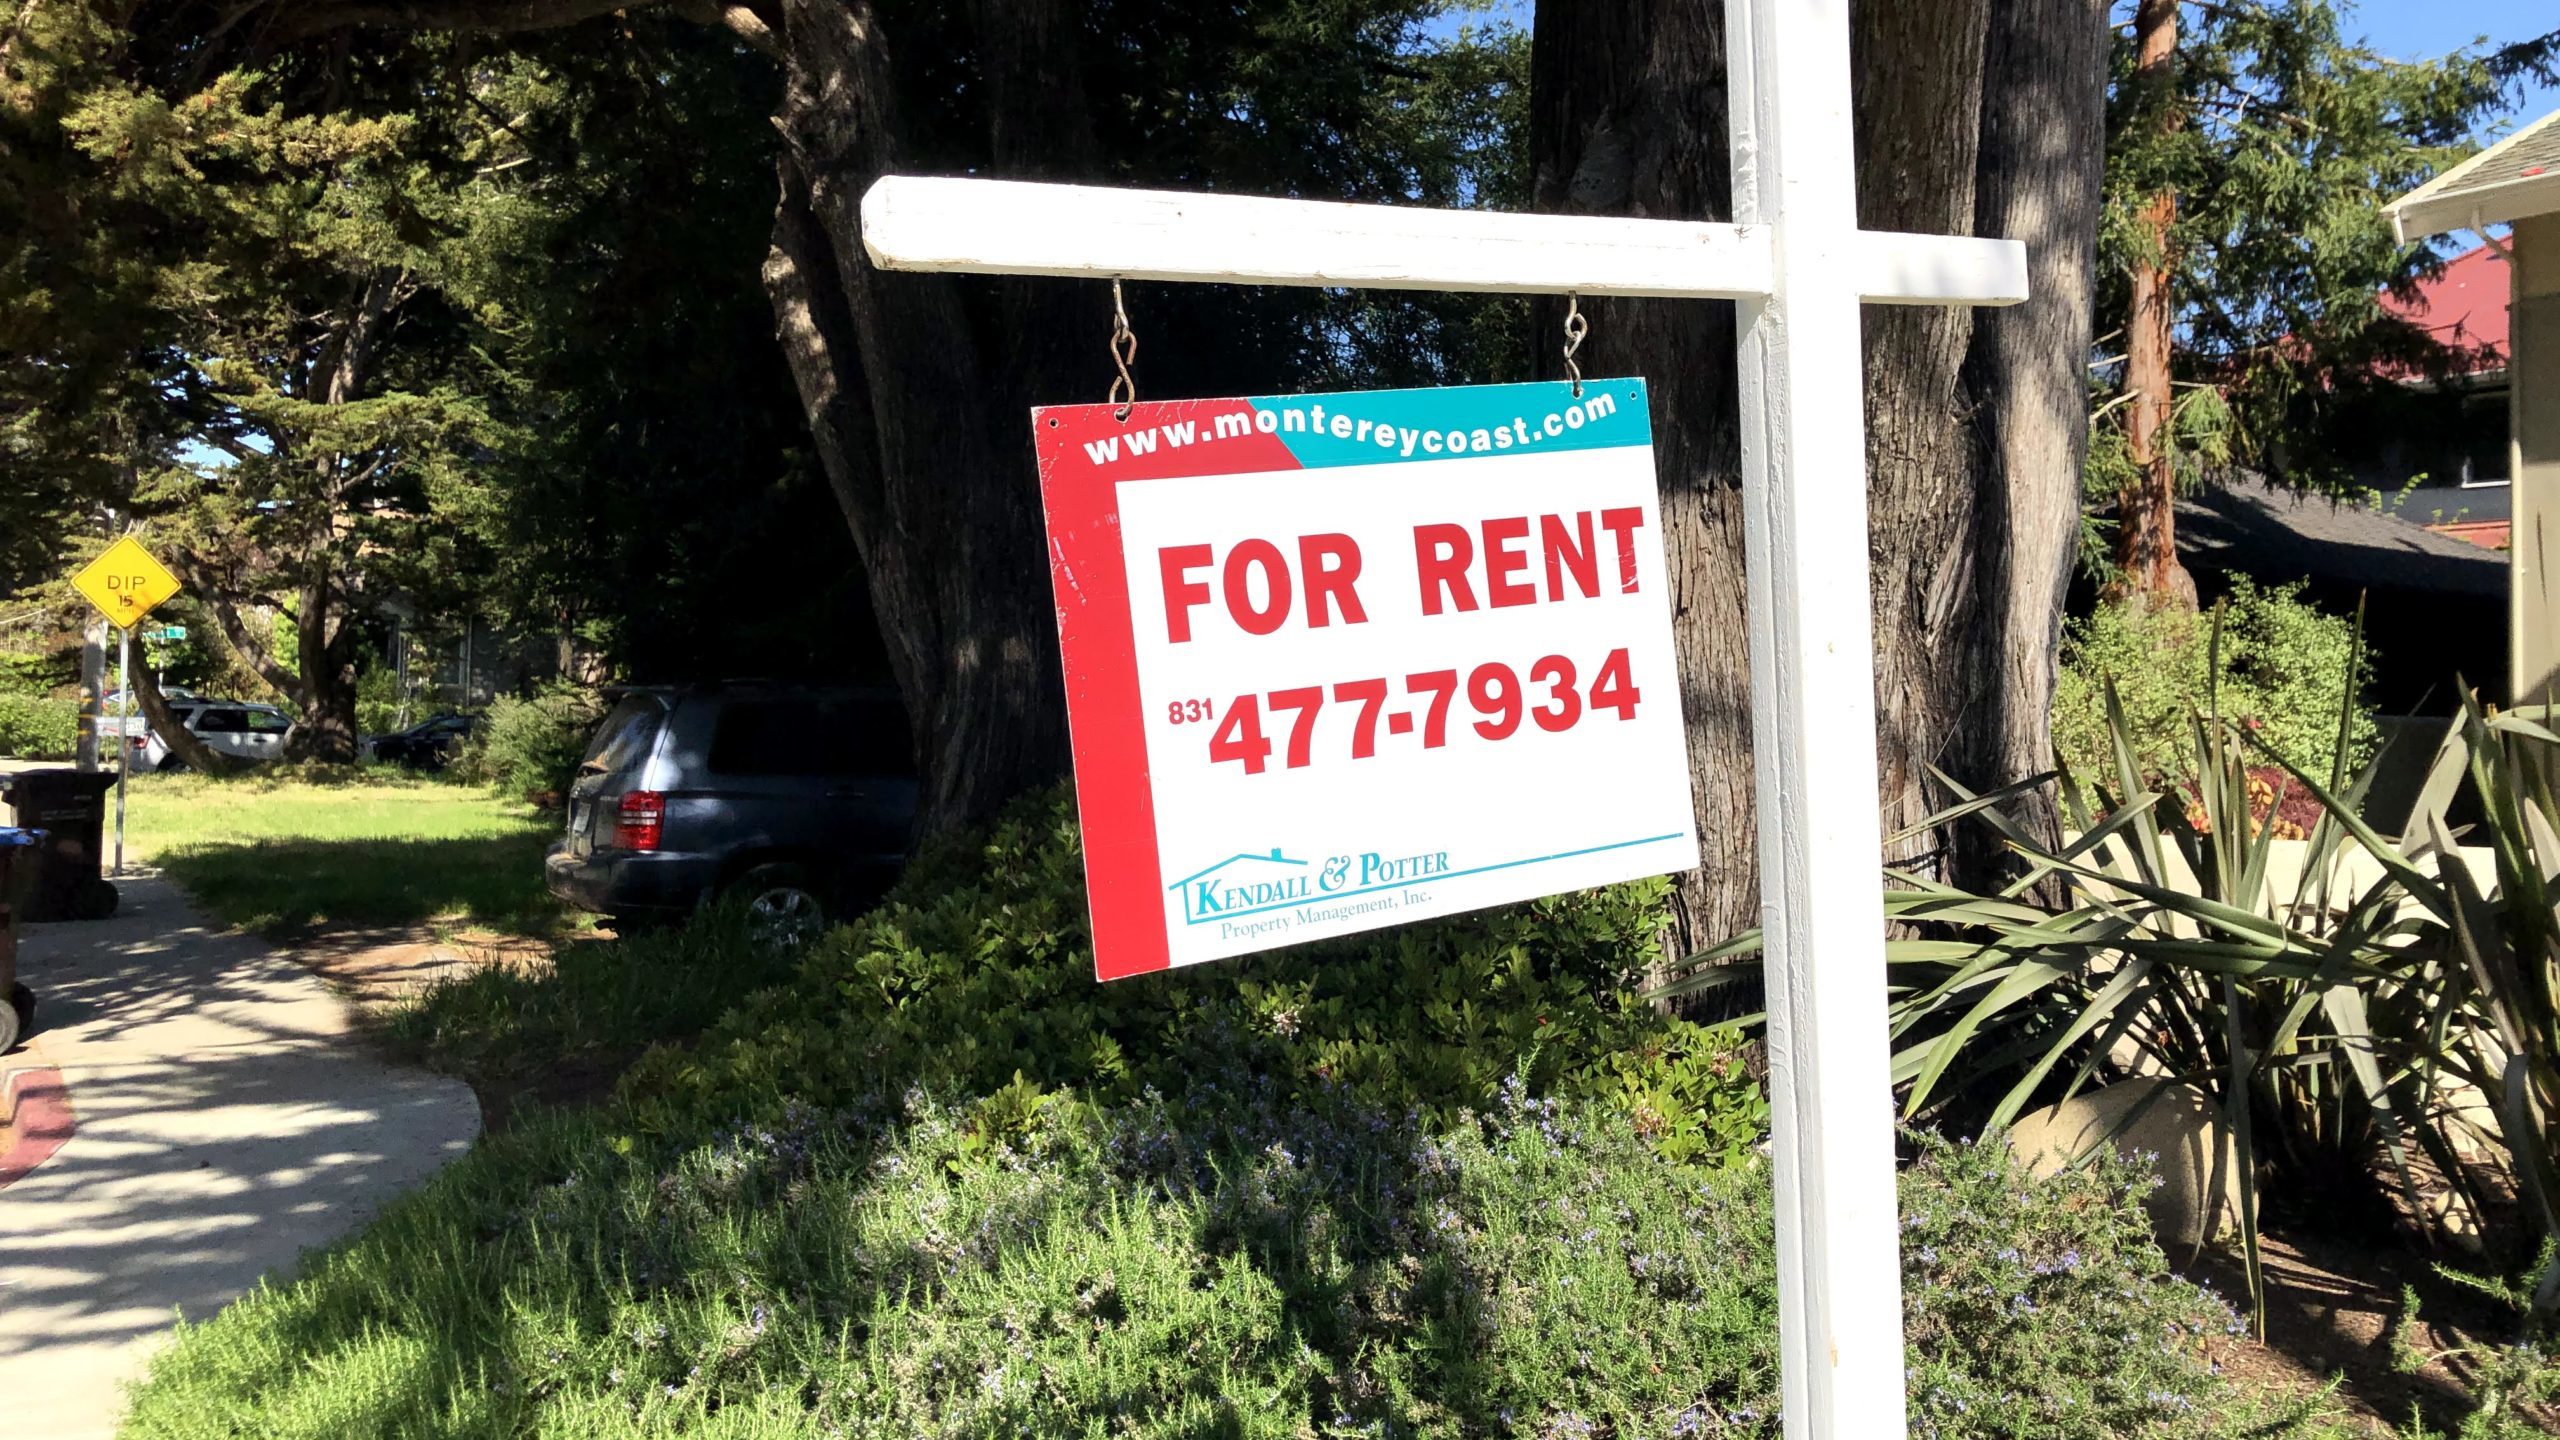 A "for rent" sign in front of a house on Pelton Avenue in Santa Cruz